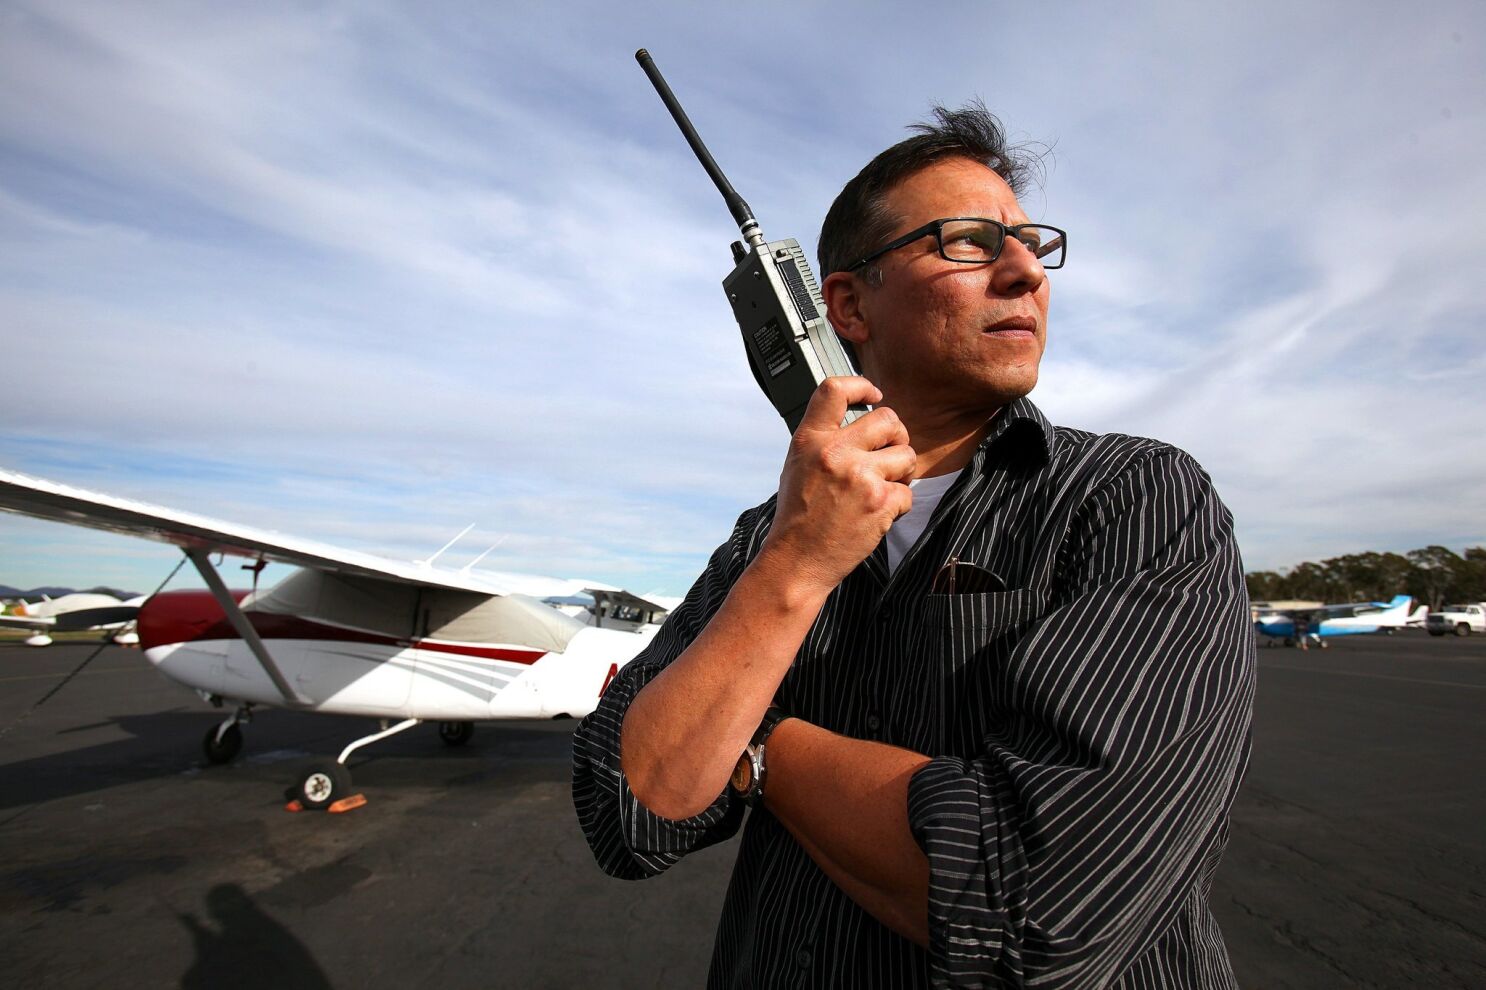 6 Easy Facts About Learning To Fly An Airplane Shown